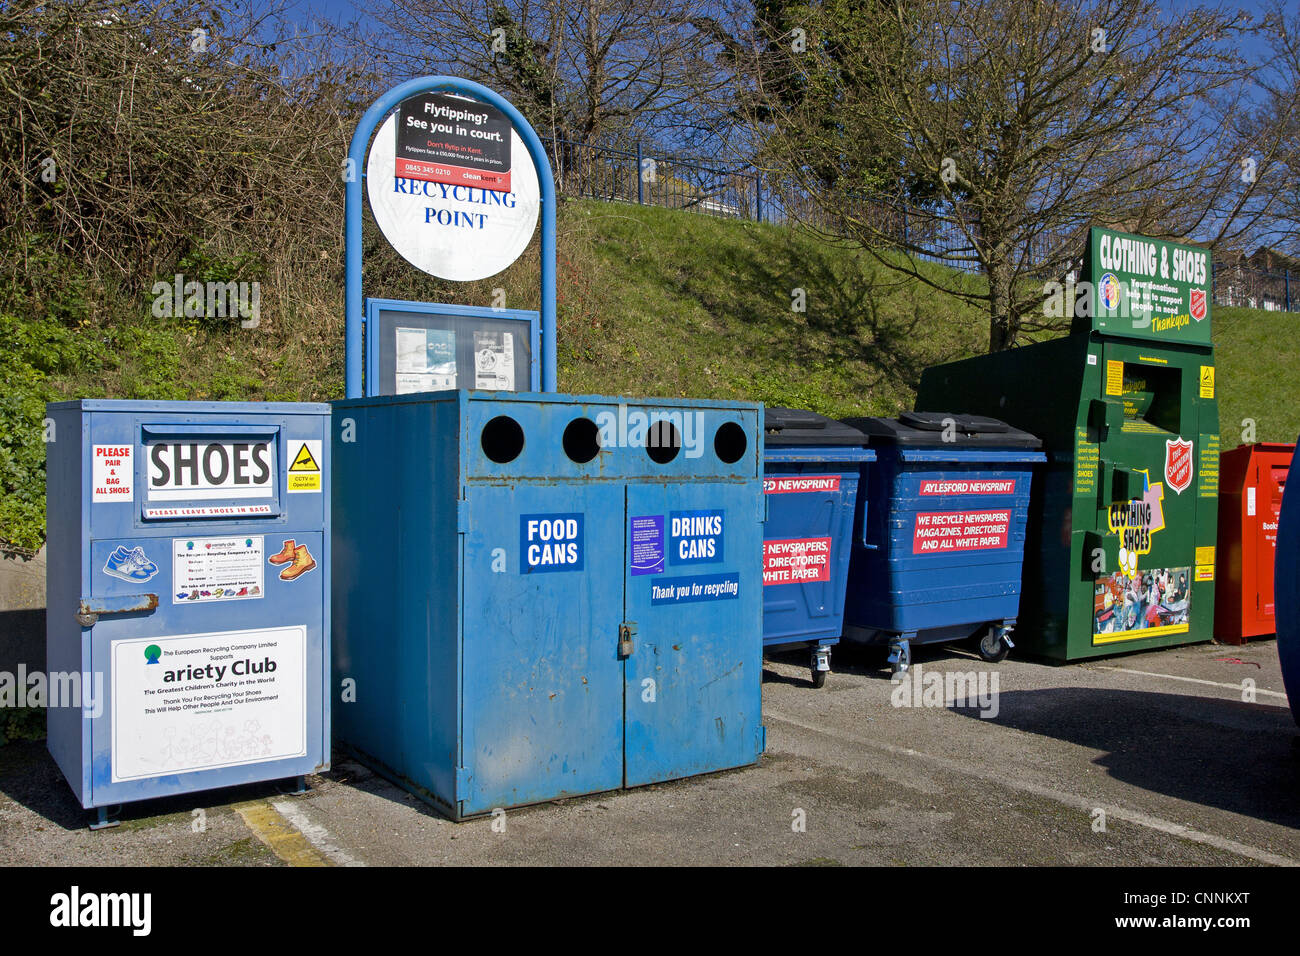 Recycling banks for shoes, cans, paper and clothing, Kent, England Stock Photo